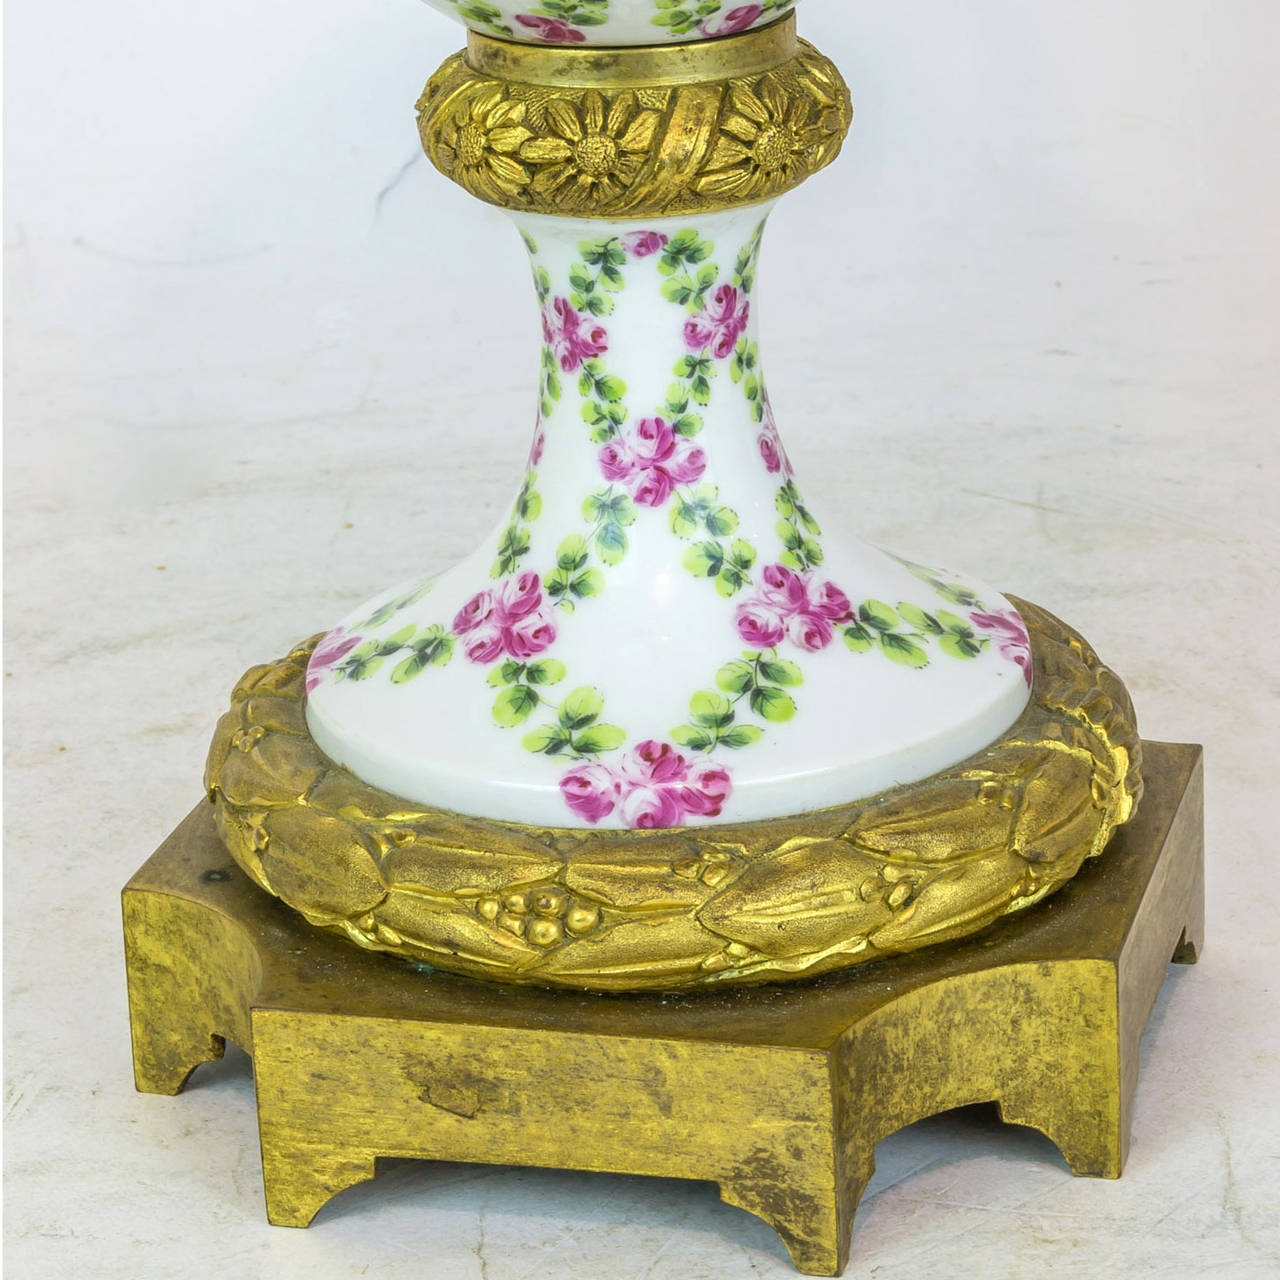 French Pair of Floral Painted Porcelain and Bronze Covered Urns